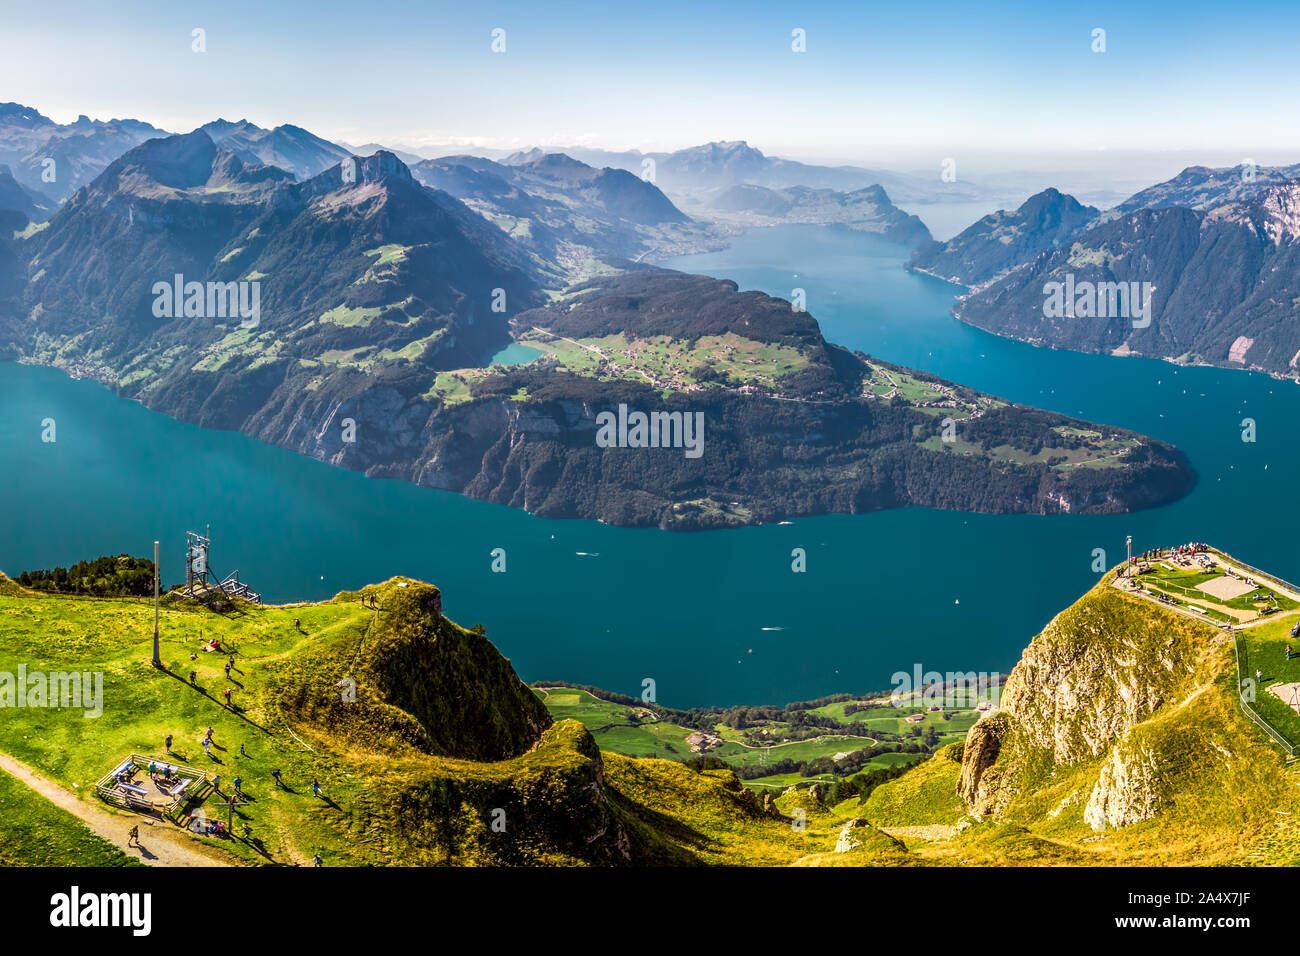 Fantastic view to Lake Lucerne with Rigi and Pilatus mountains, Brunnen town from Fronalpstock, Switzerland, Europe. Stock Photo